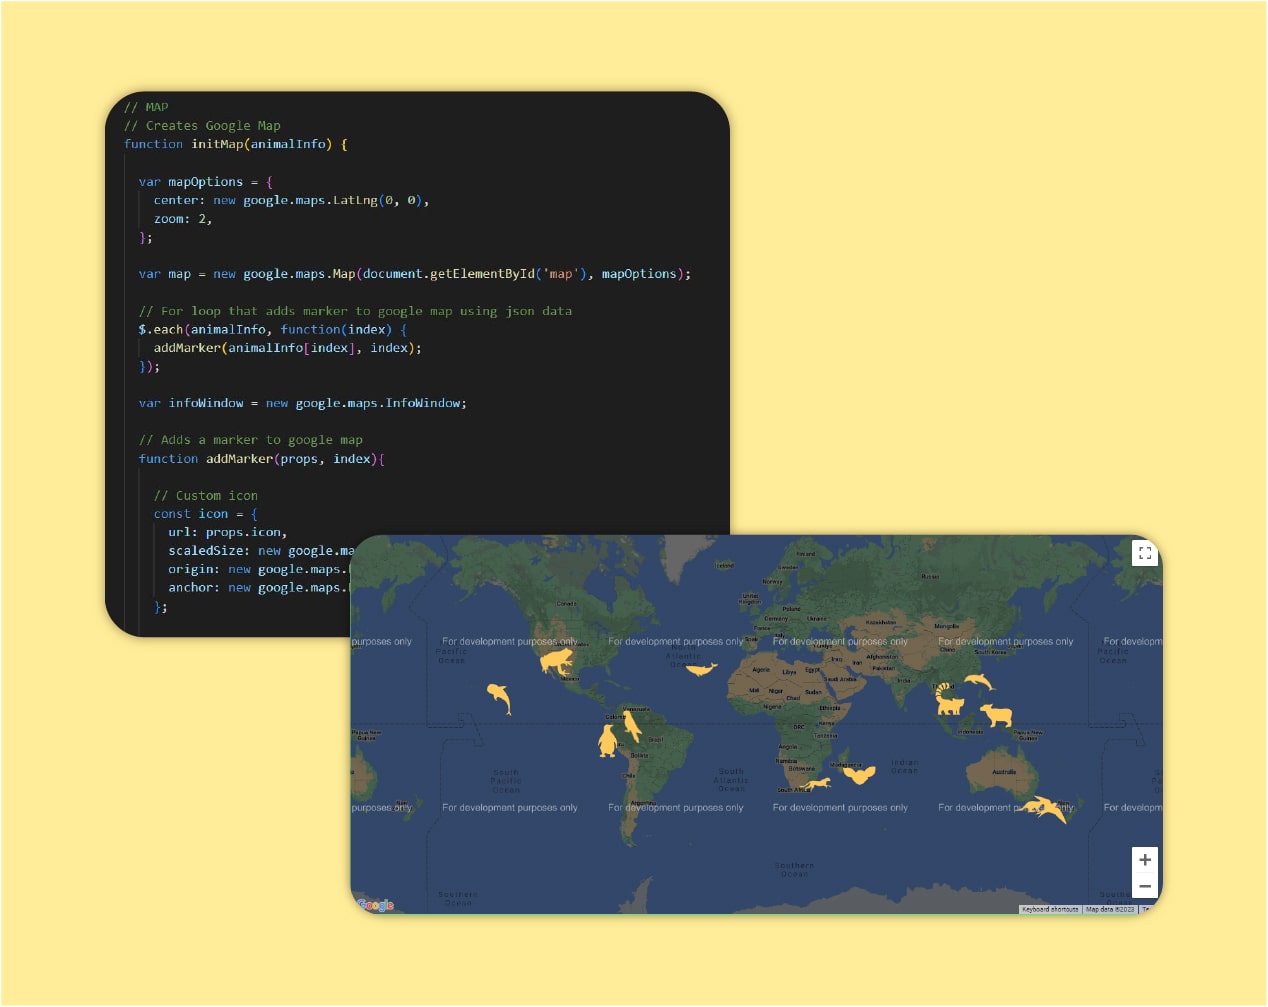 A picture that includes the screenshot of the JavaScript code for the Google Maps API in VS Code. A screenshot of the Google Map form the web app is also included.